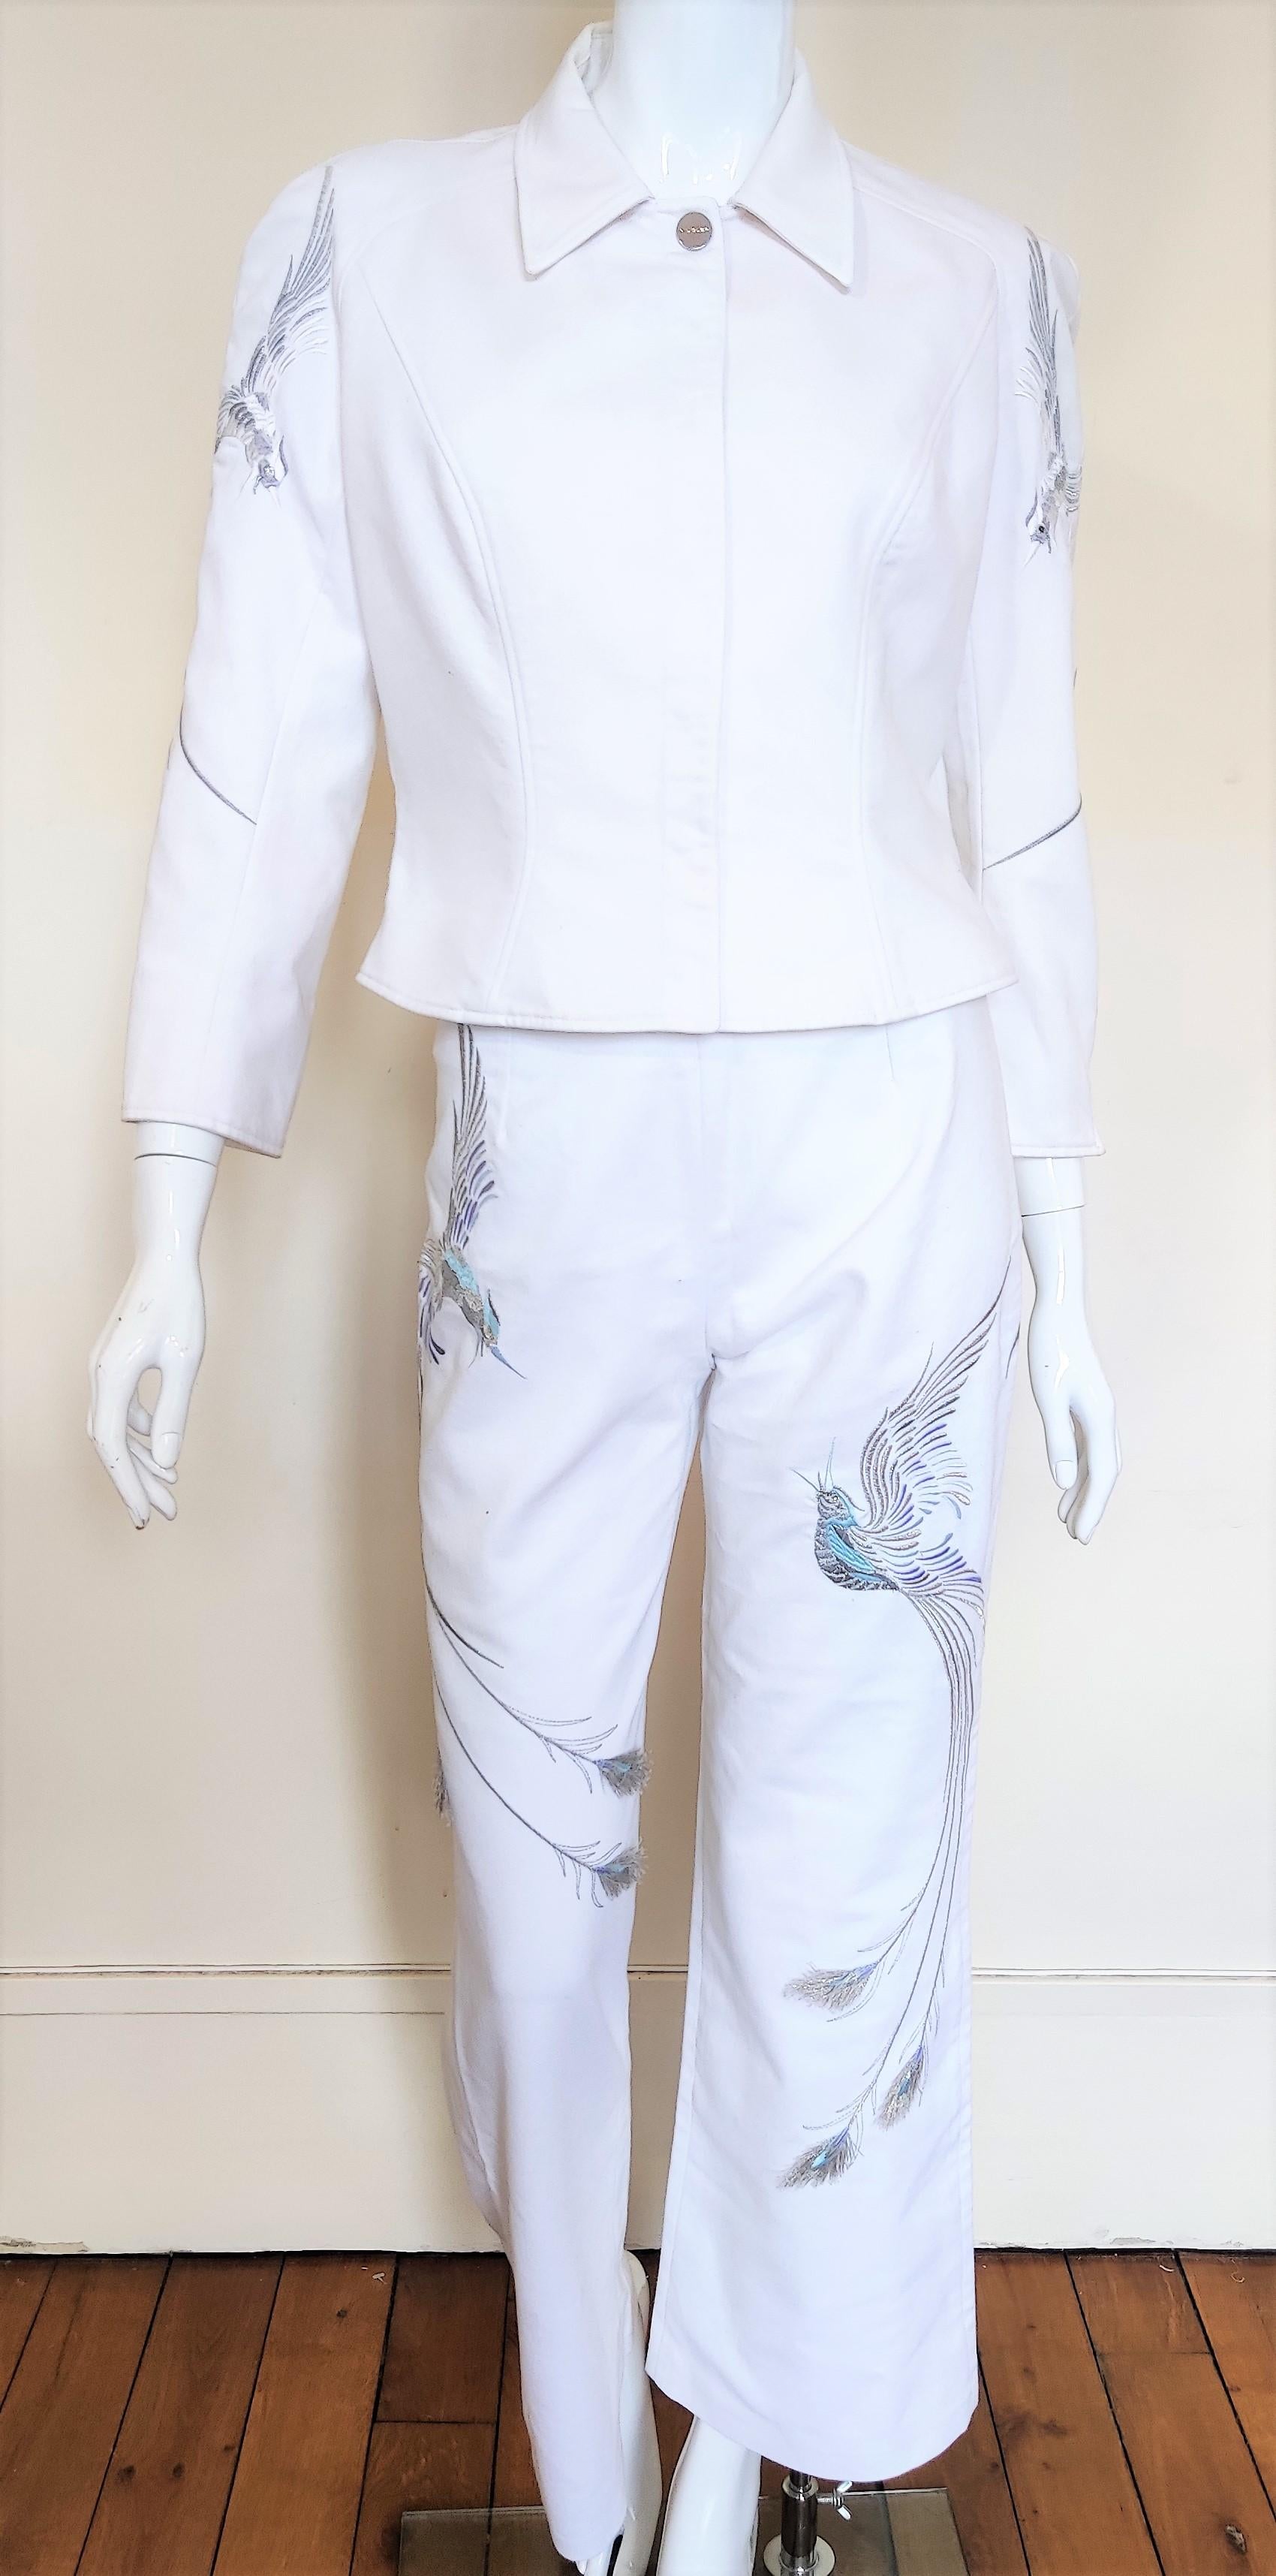 Gray Thierry Mugler Peacock Bird White Gown Couture Pants Jacket Ensemble Suit For Sale